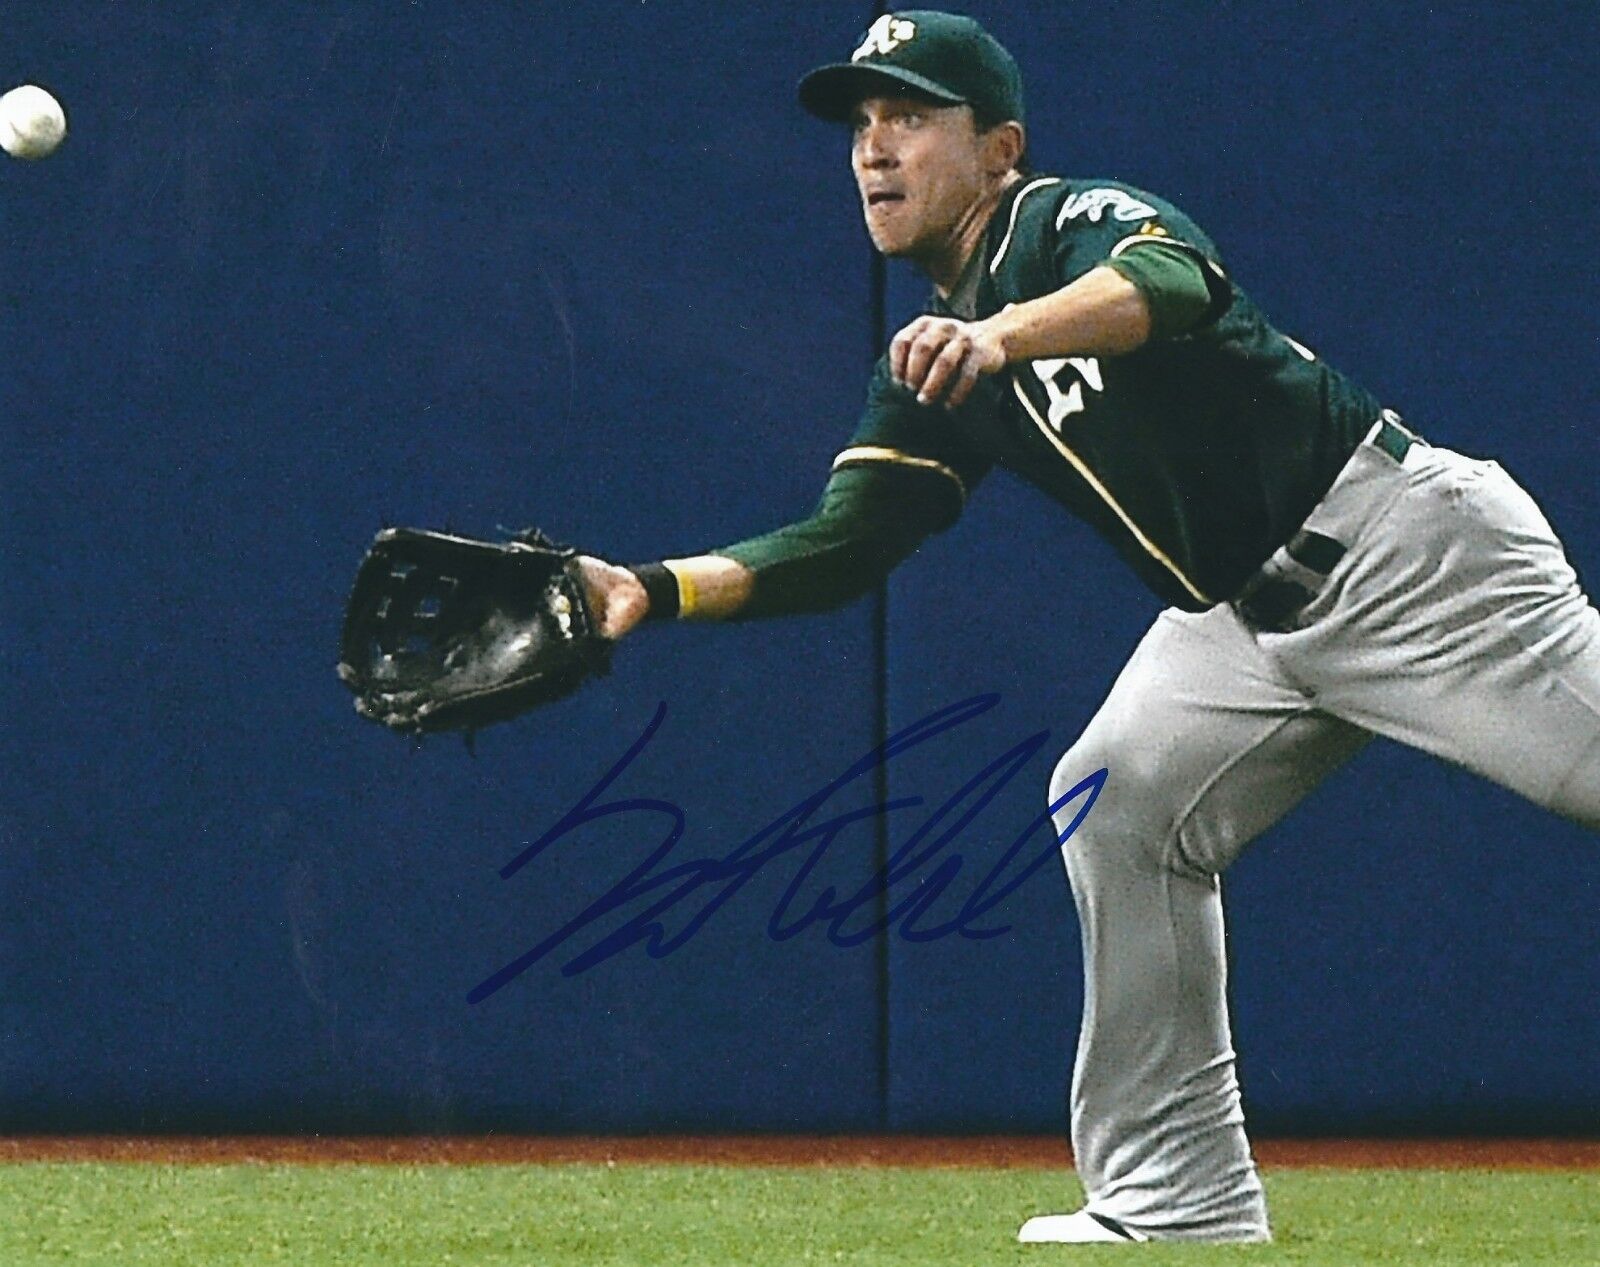 Signed 8x10 SAM FULD Oakland A's Autographed Photo Poster painting - COA